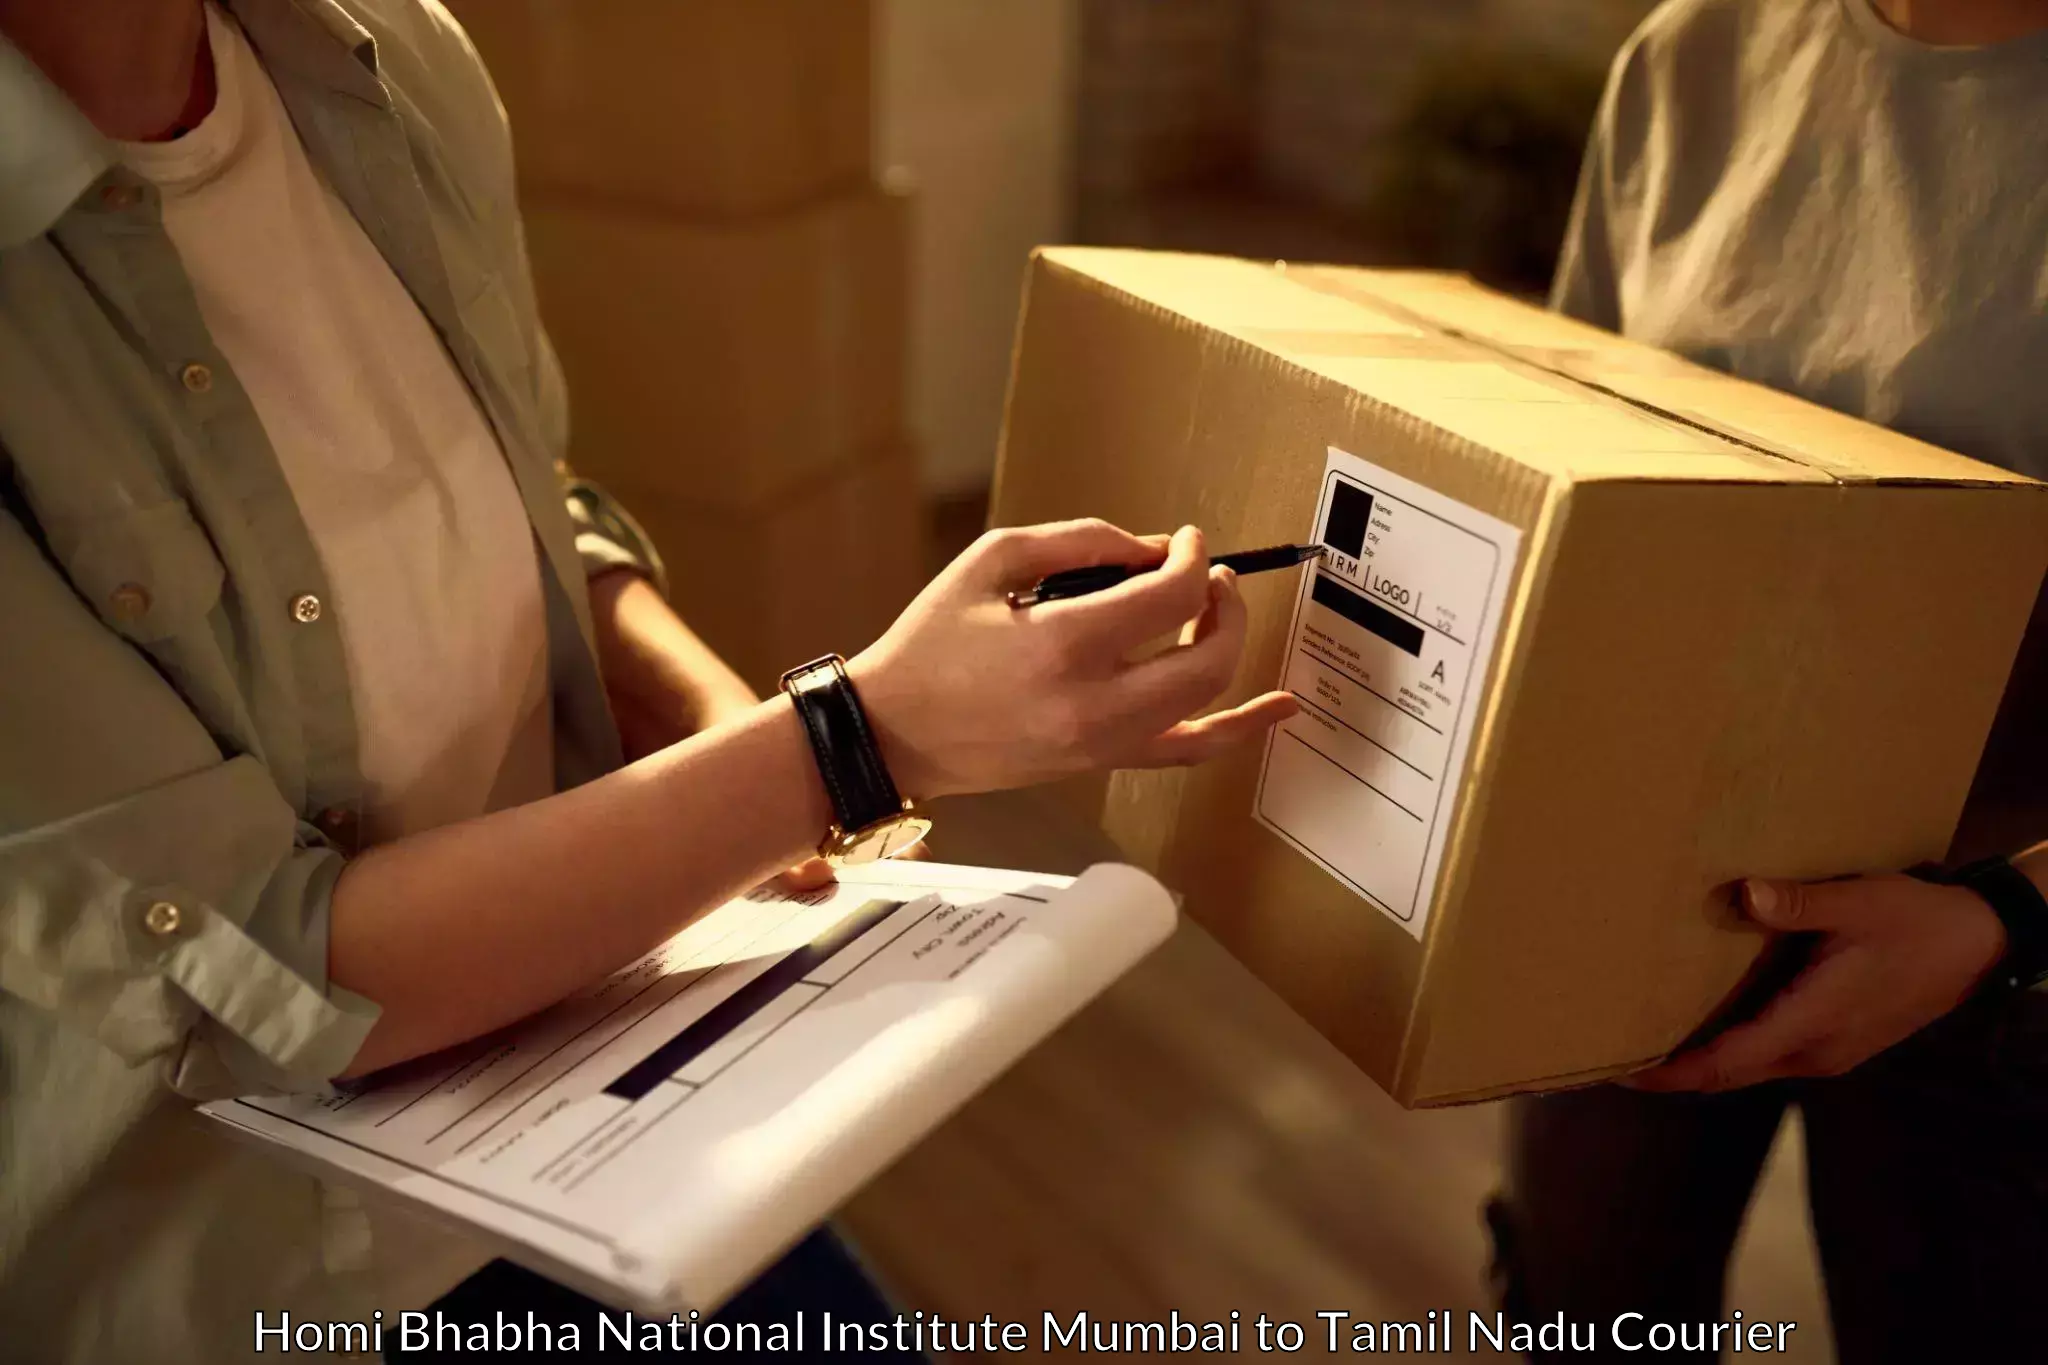 Nationwide parcel services Homi Bhabha National Institute Mumbai to Omalur